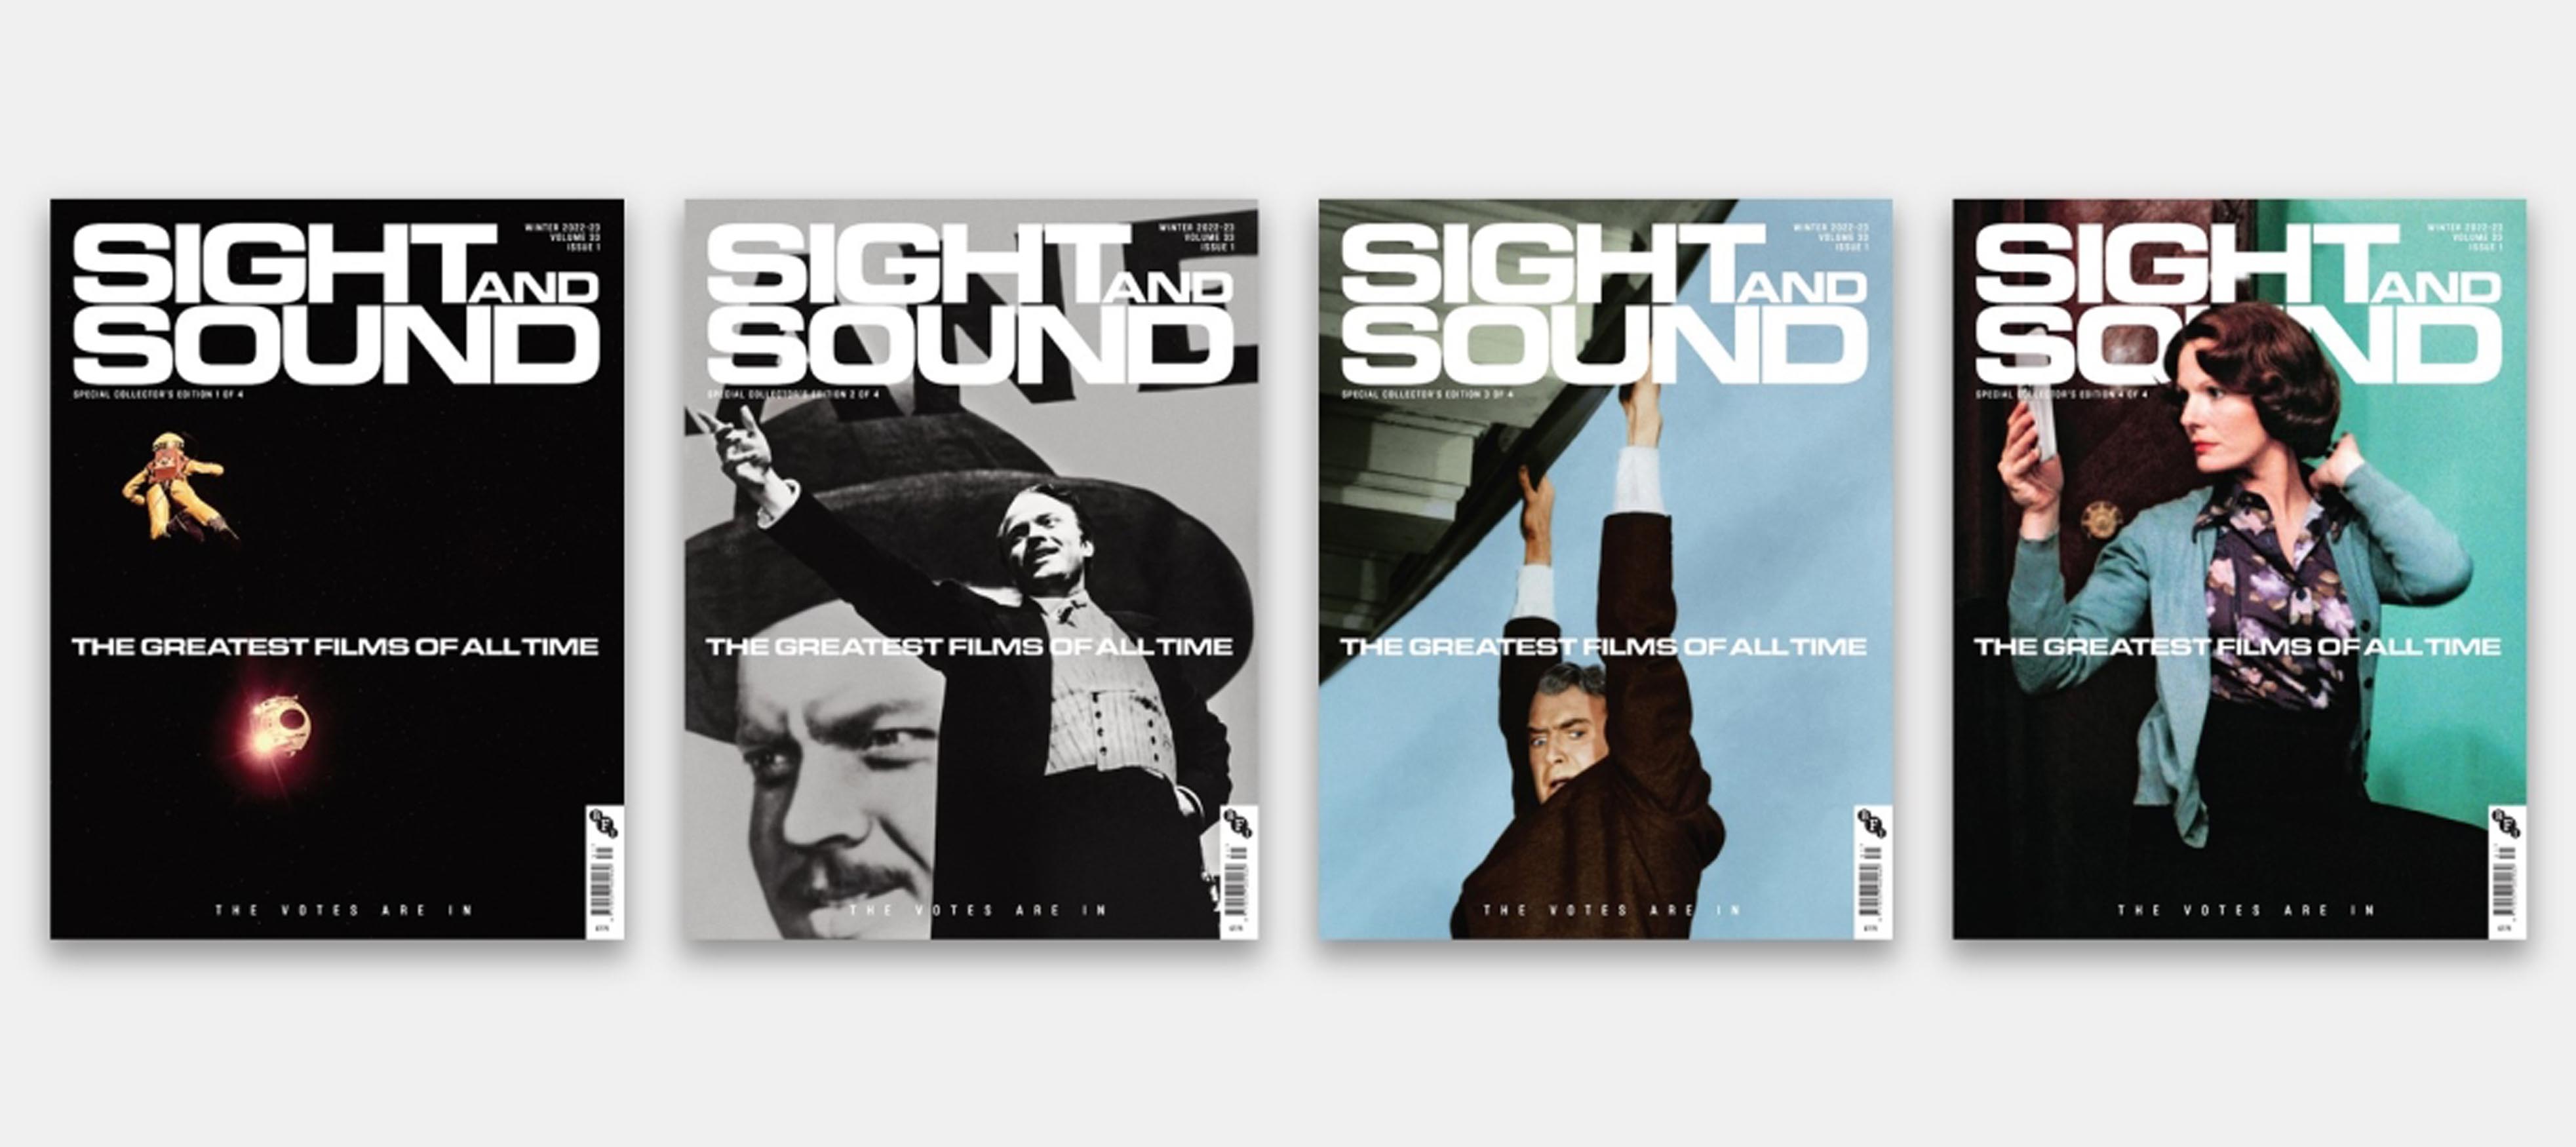 BFI Shop Sight and Sound Greatest Films of All Time DVD & Bluray